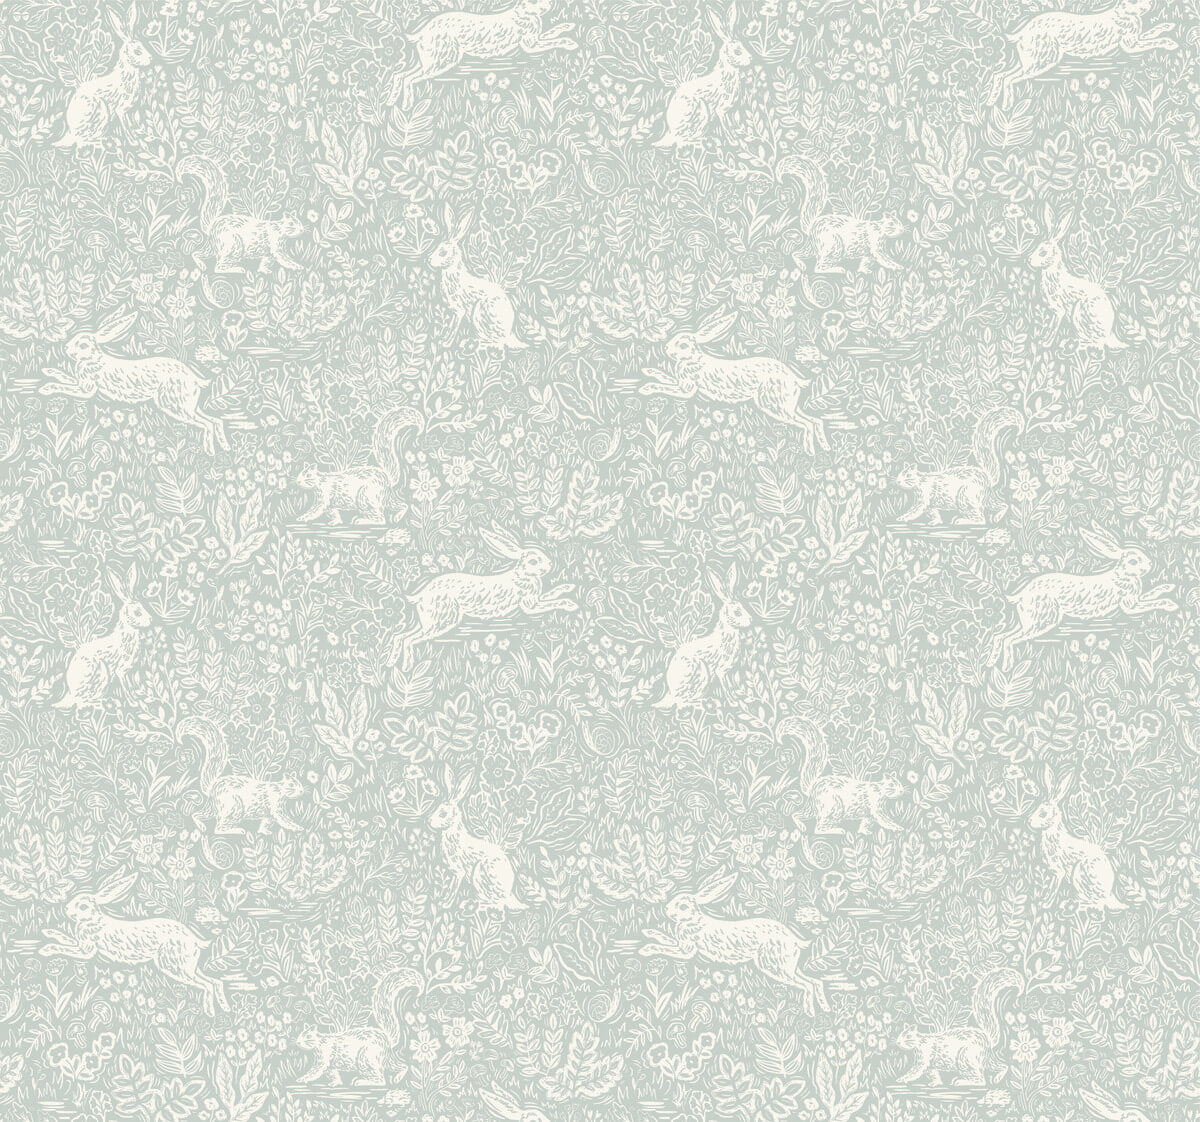 Rifle Paper Co. Fable Wallpaper - SAMPLE